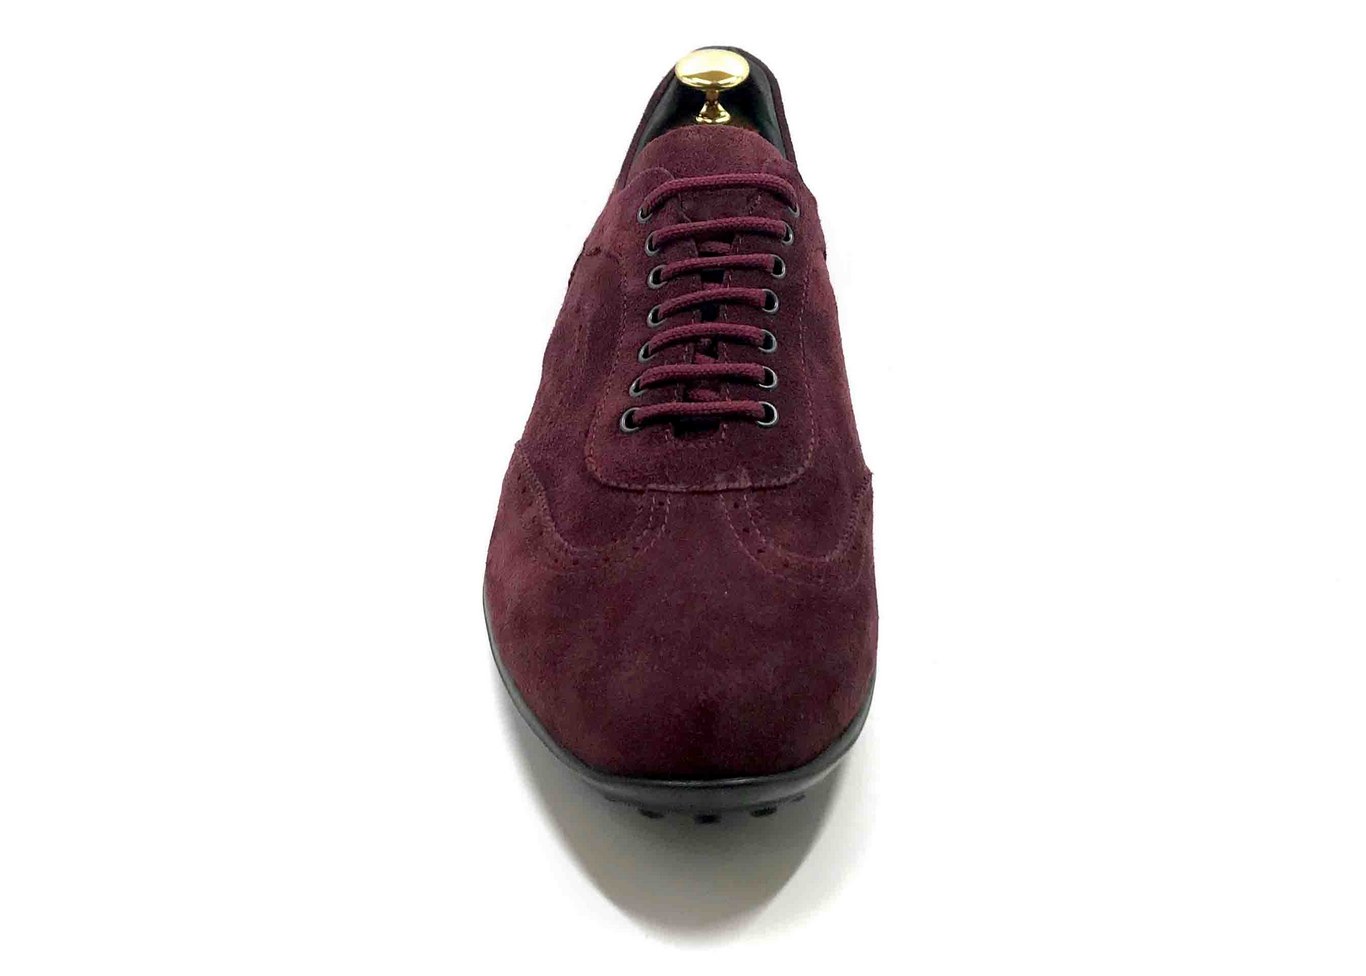 Smart Sneaker in deep Bordeaux suede with extractable innersole